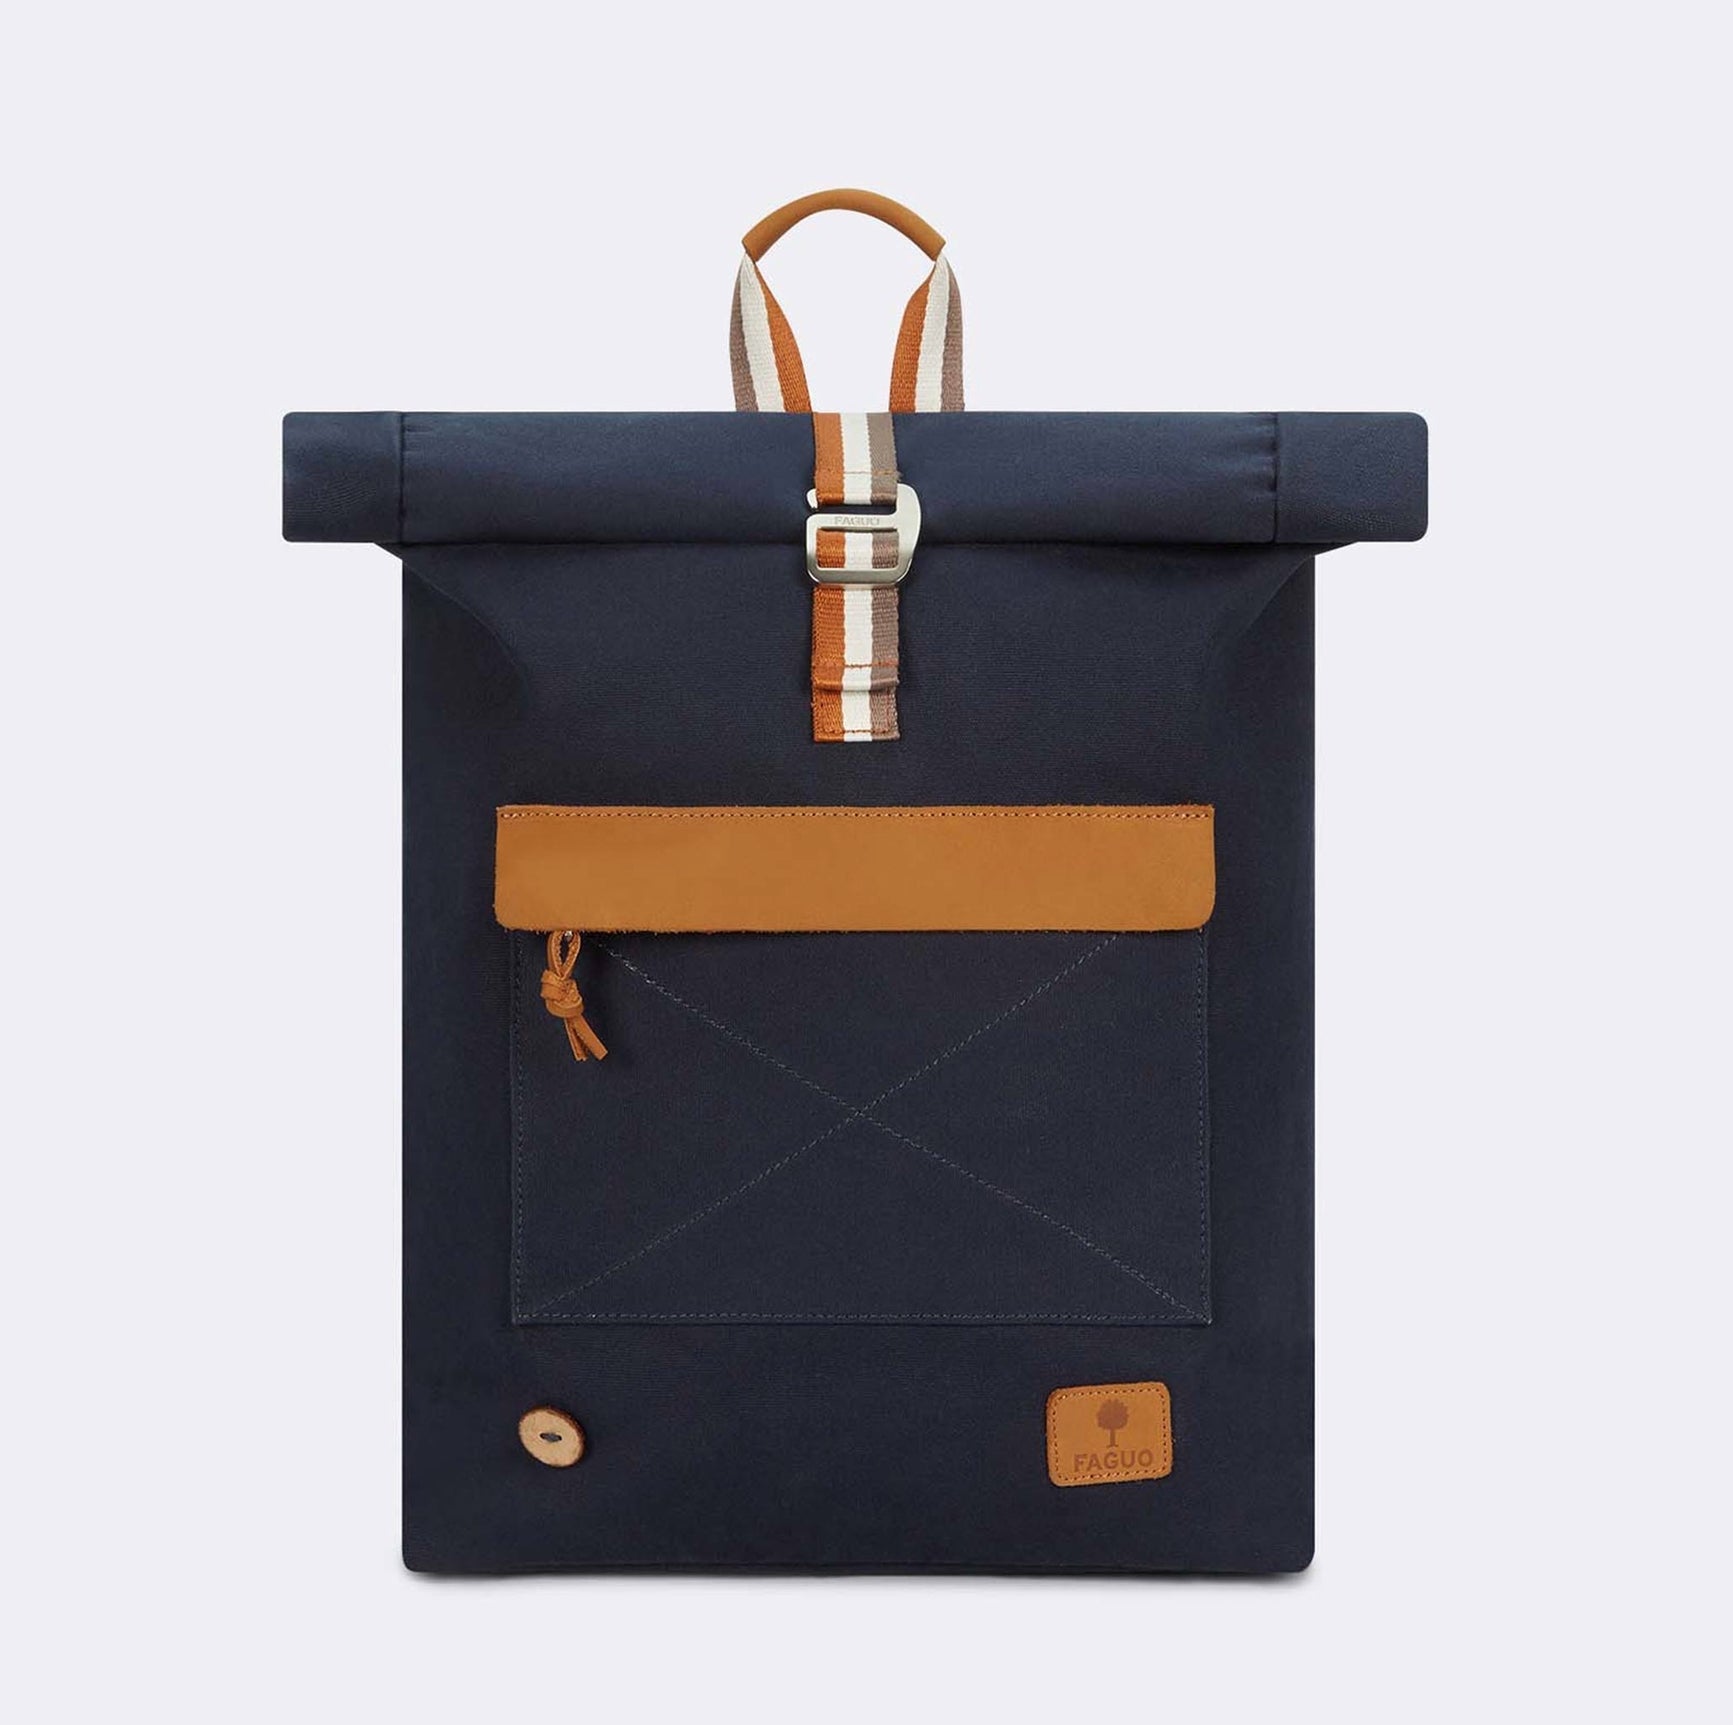 Faguo - Navy & tawny cotton backpack - The Good Chic